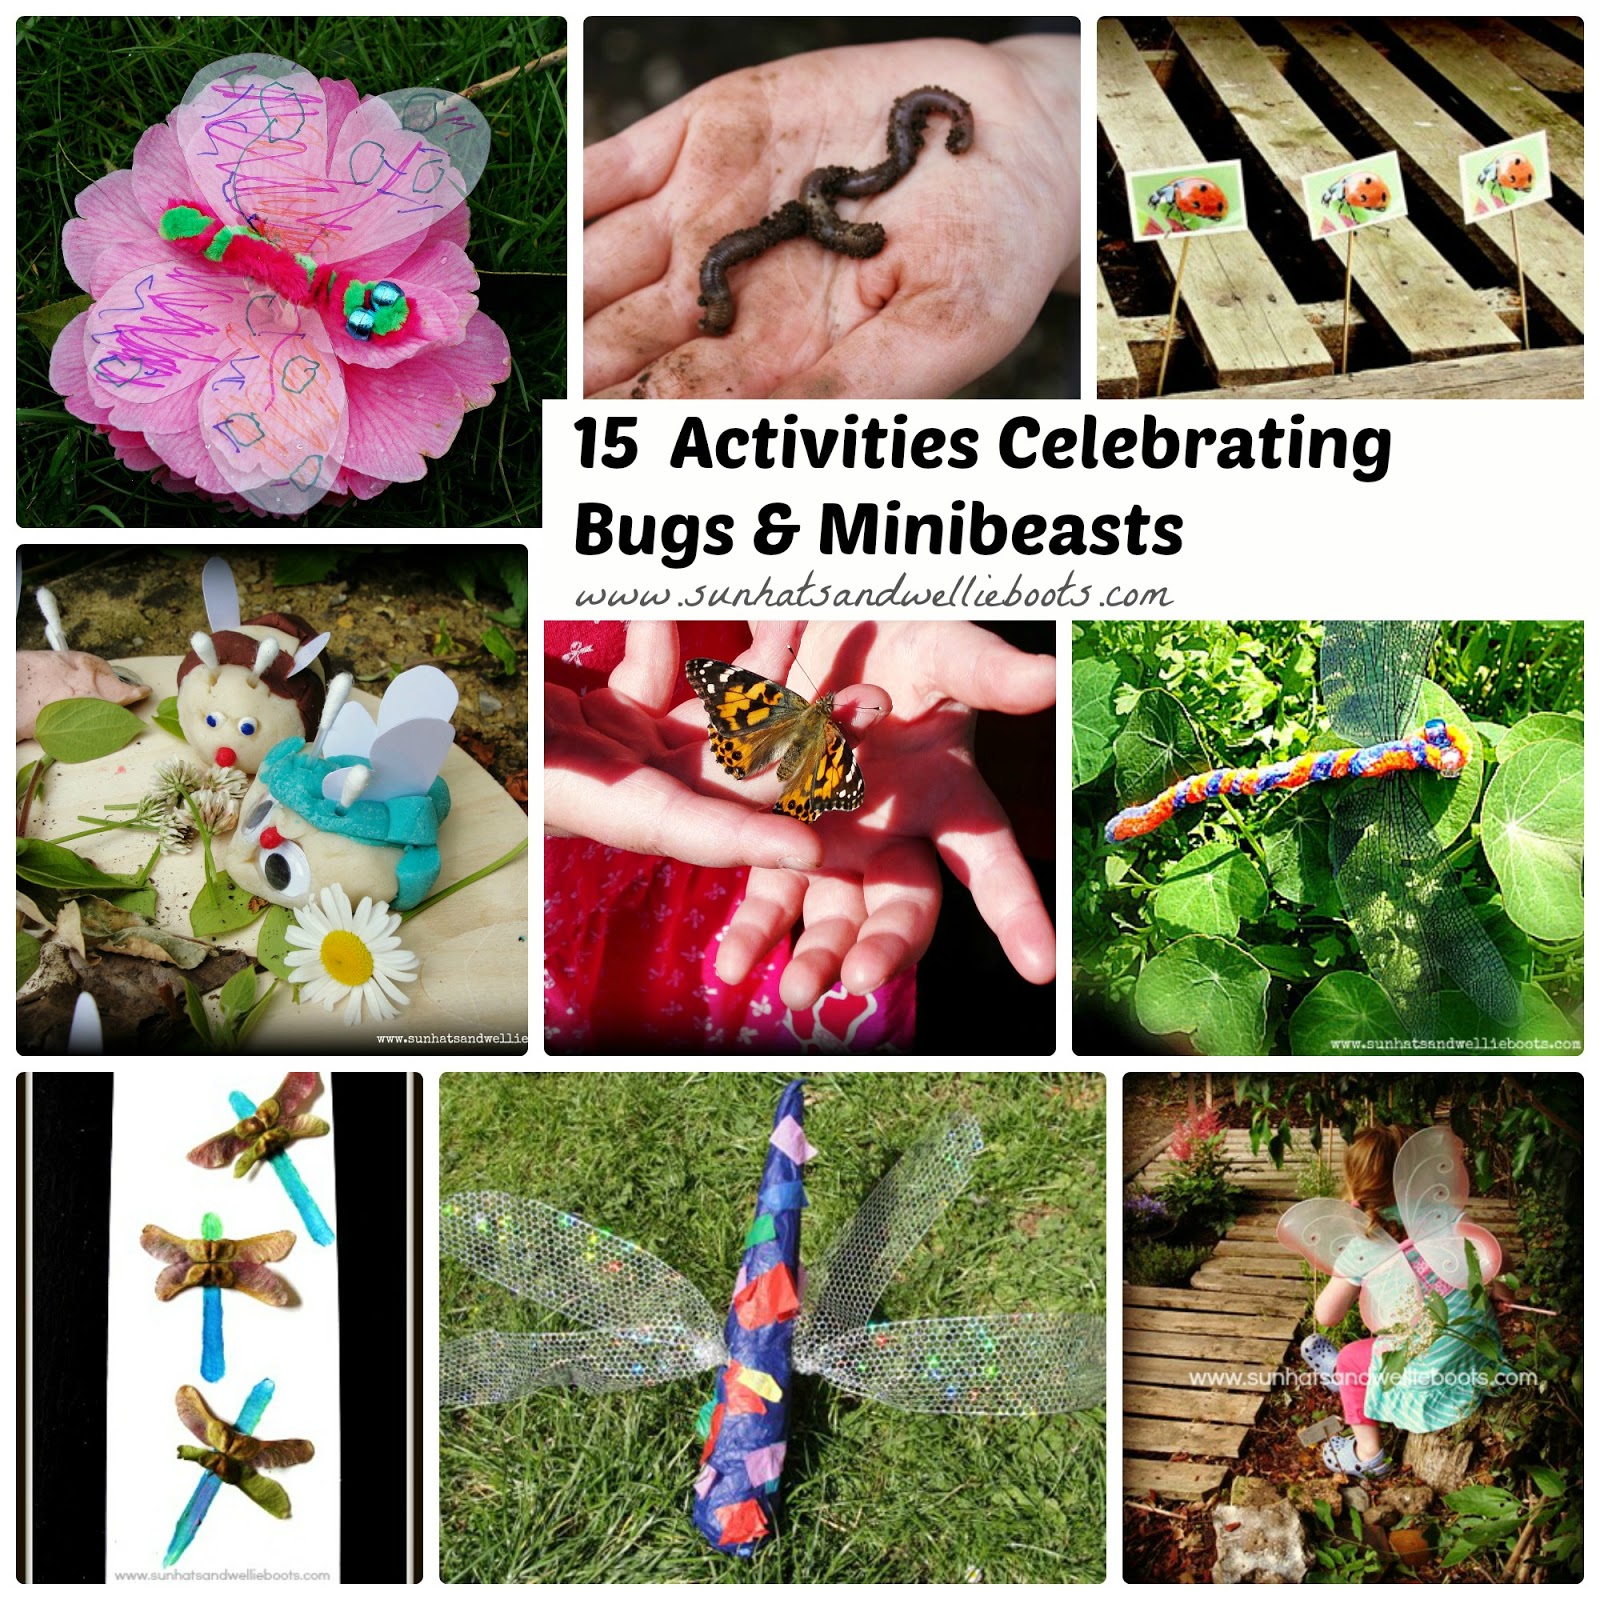 Sun Hats & Wellie Boots: Celebrating Minibeasts & Bugs - 15 Outdoor